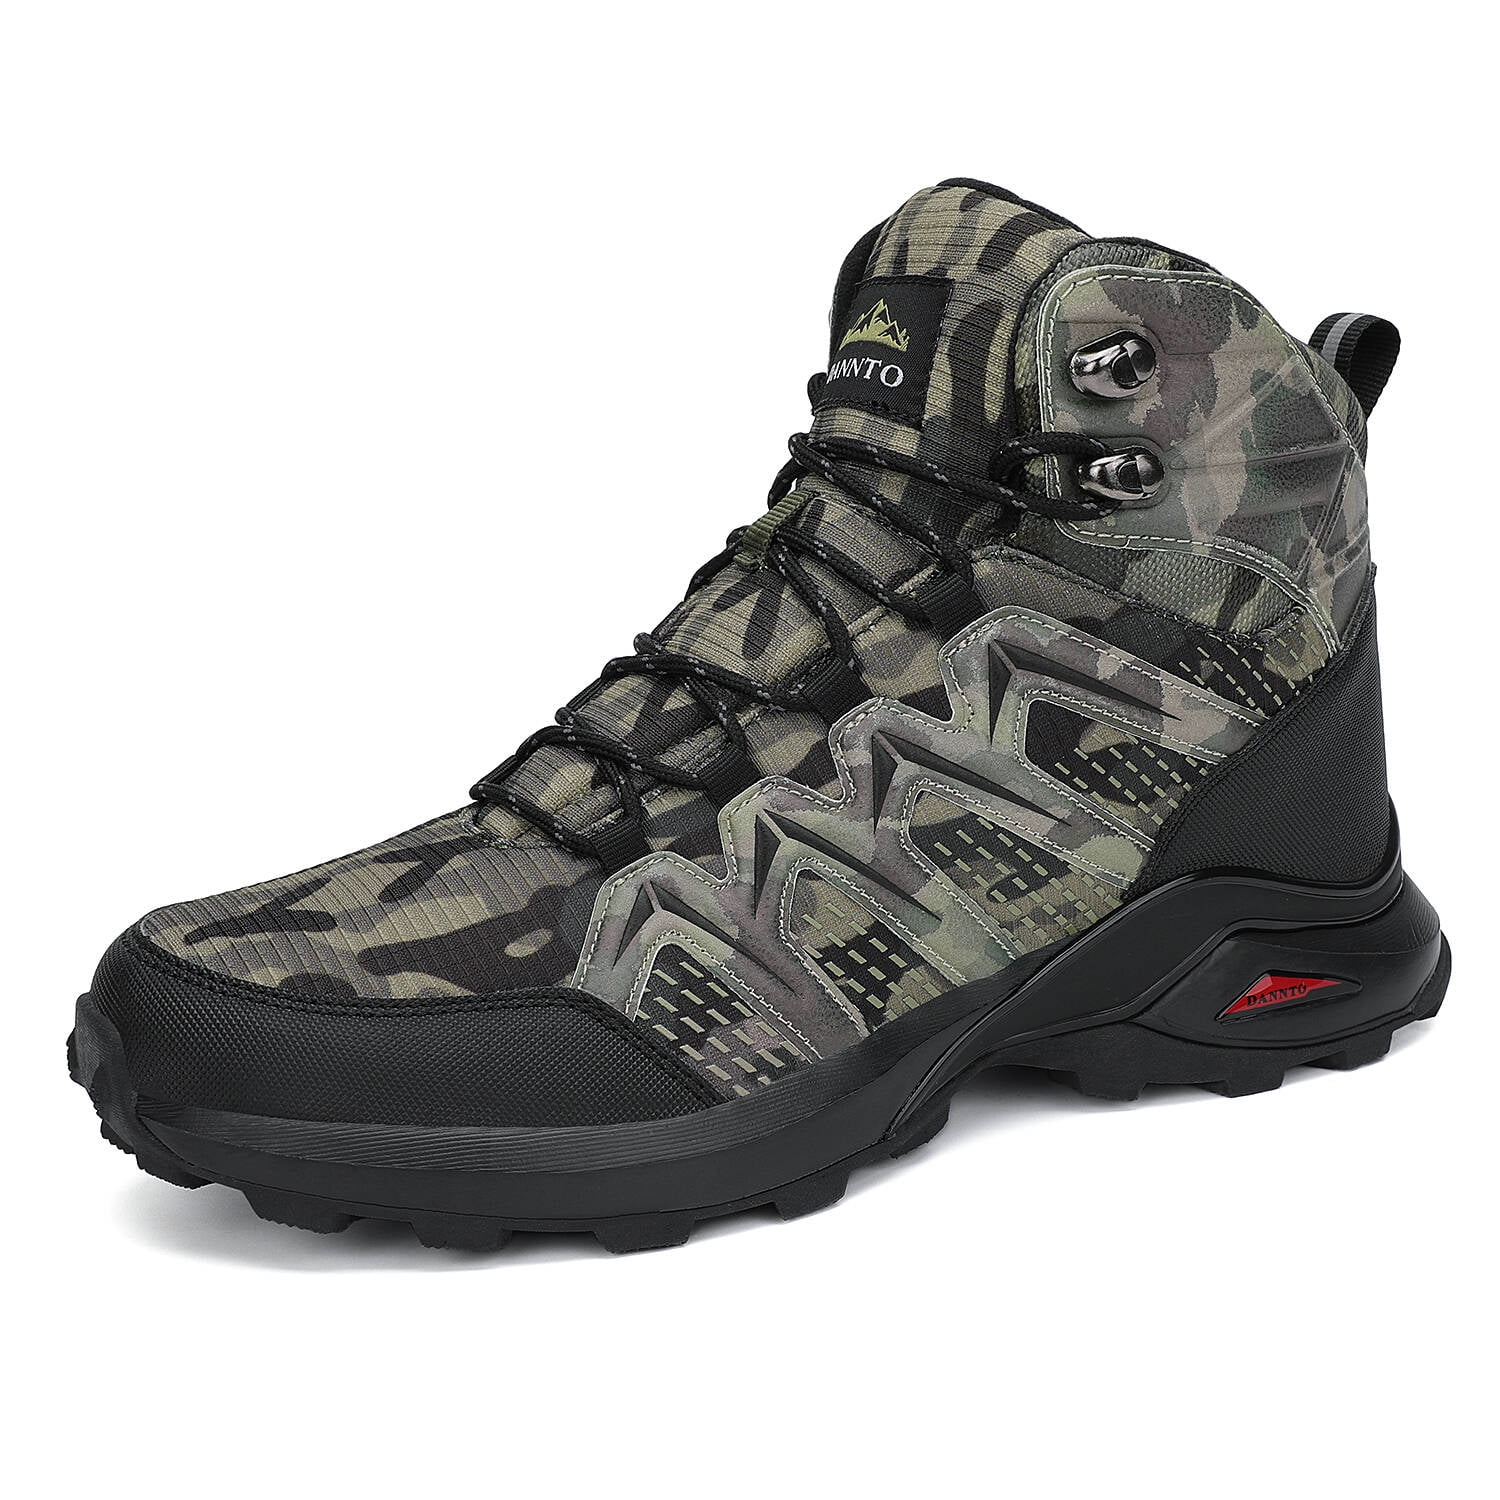 Treaty At dawn Warrior Dannto Mens Mid Ankle Hiking Boots Water Resistant Outdoor Snow Shoes Lightweight  Walking Trekking Tactical Hunting Sneakers - Walmart.com